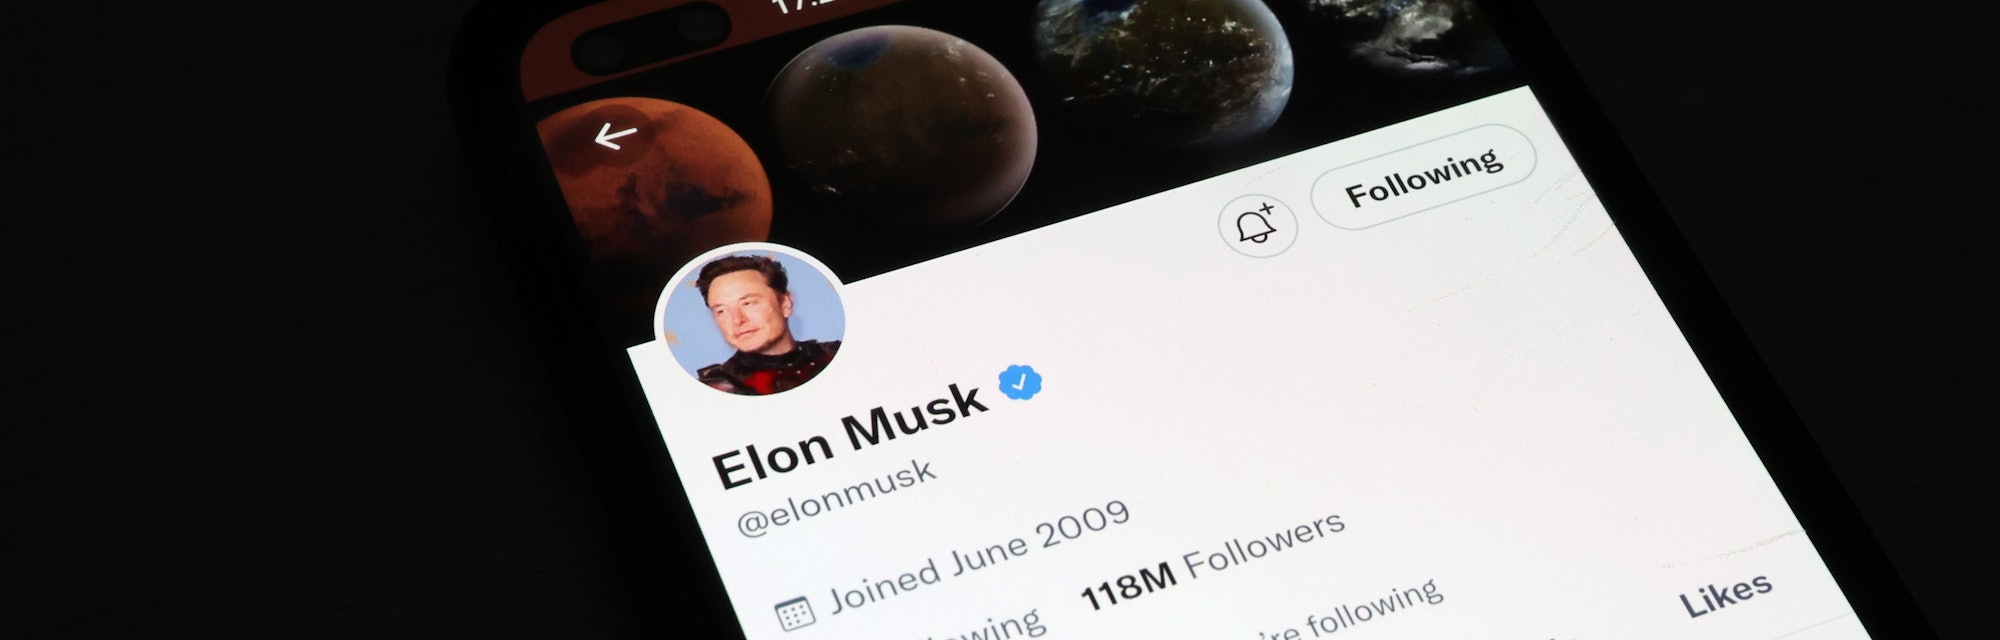 NEWCASTLE-UNDER-LYME, ENGLAND - NOVEMBER 21: The Twitter account of Elon Musk is displayed on a smar...